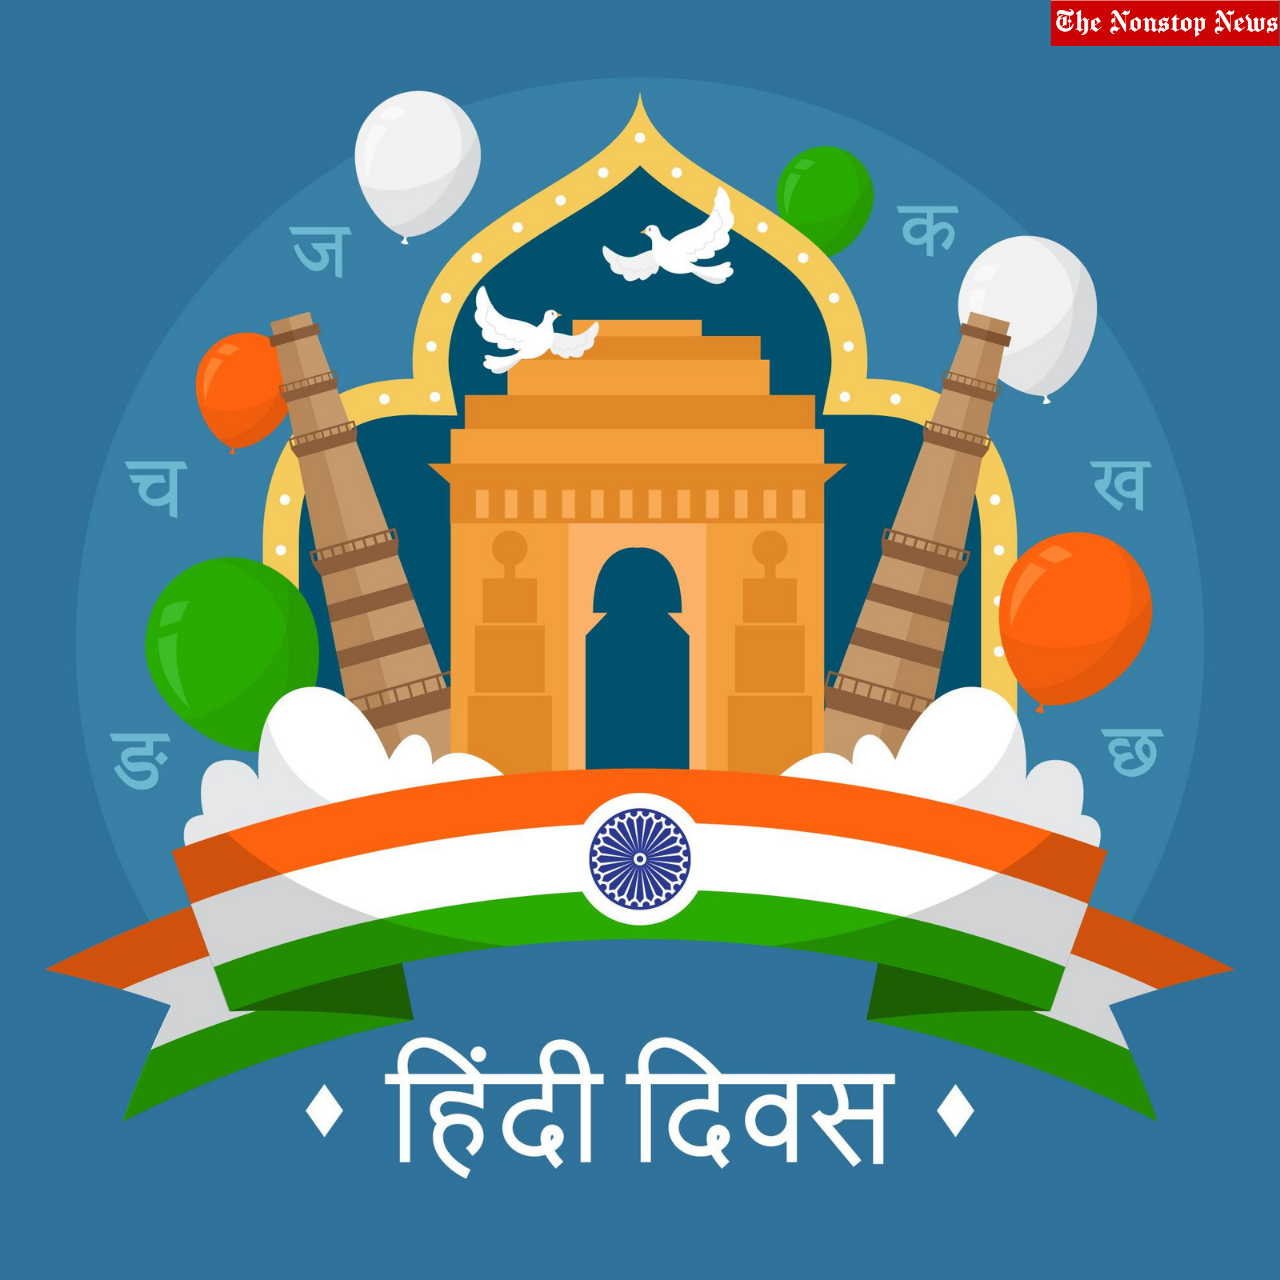 Hindi Diwas 2021 Banner, Poster, Background, Vector, WhatsApp Images, Caption, and DP to celebrate mother language day